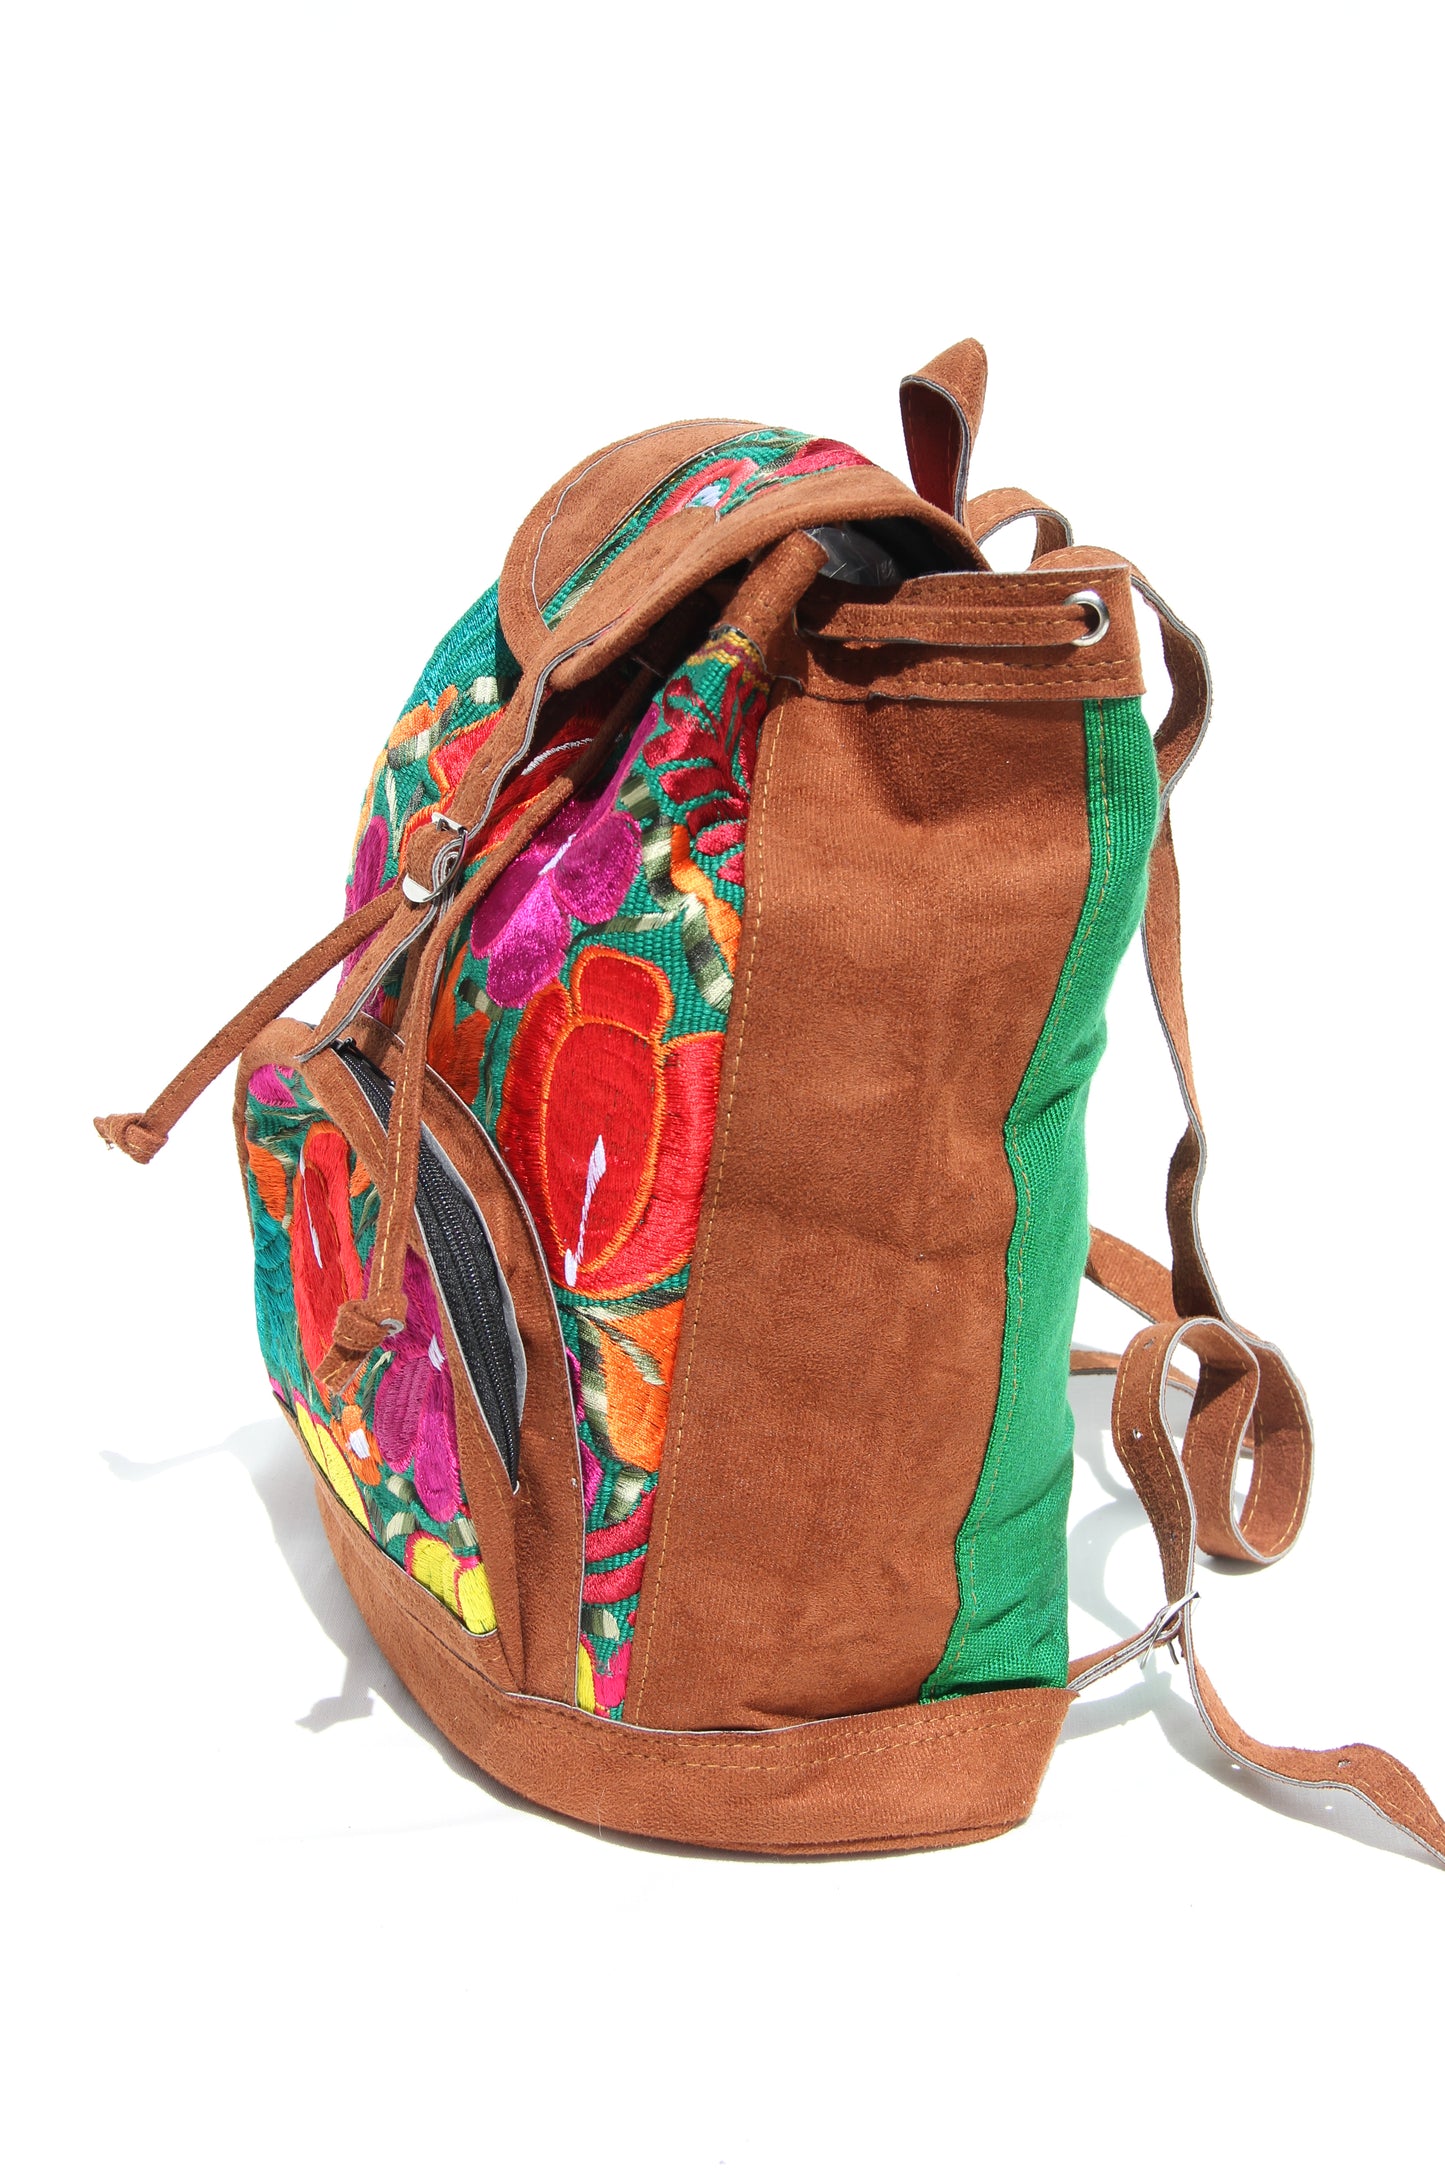 colorful huipil floral embroidery backpack green woven fabric and faux suede contrast with adjustable straps and front buckle closure with front zipper pocket the prefect travel, hiking or beach bag unique bag great for back to school take this bag on your next destination boho bag and hippie style bag a great standout accessories made in Guatemala